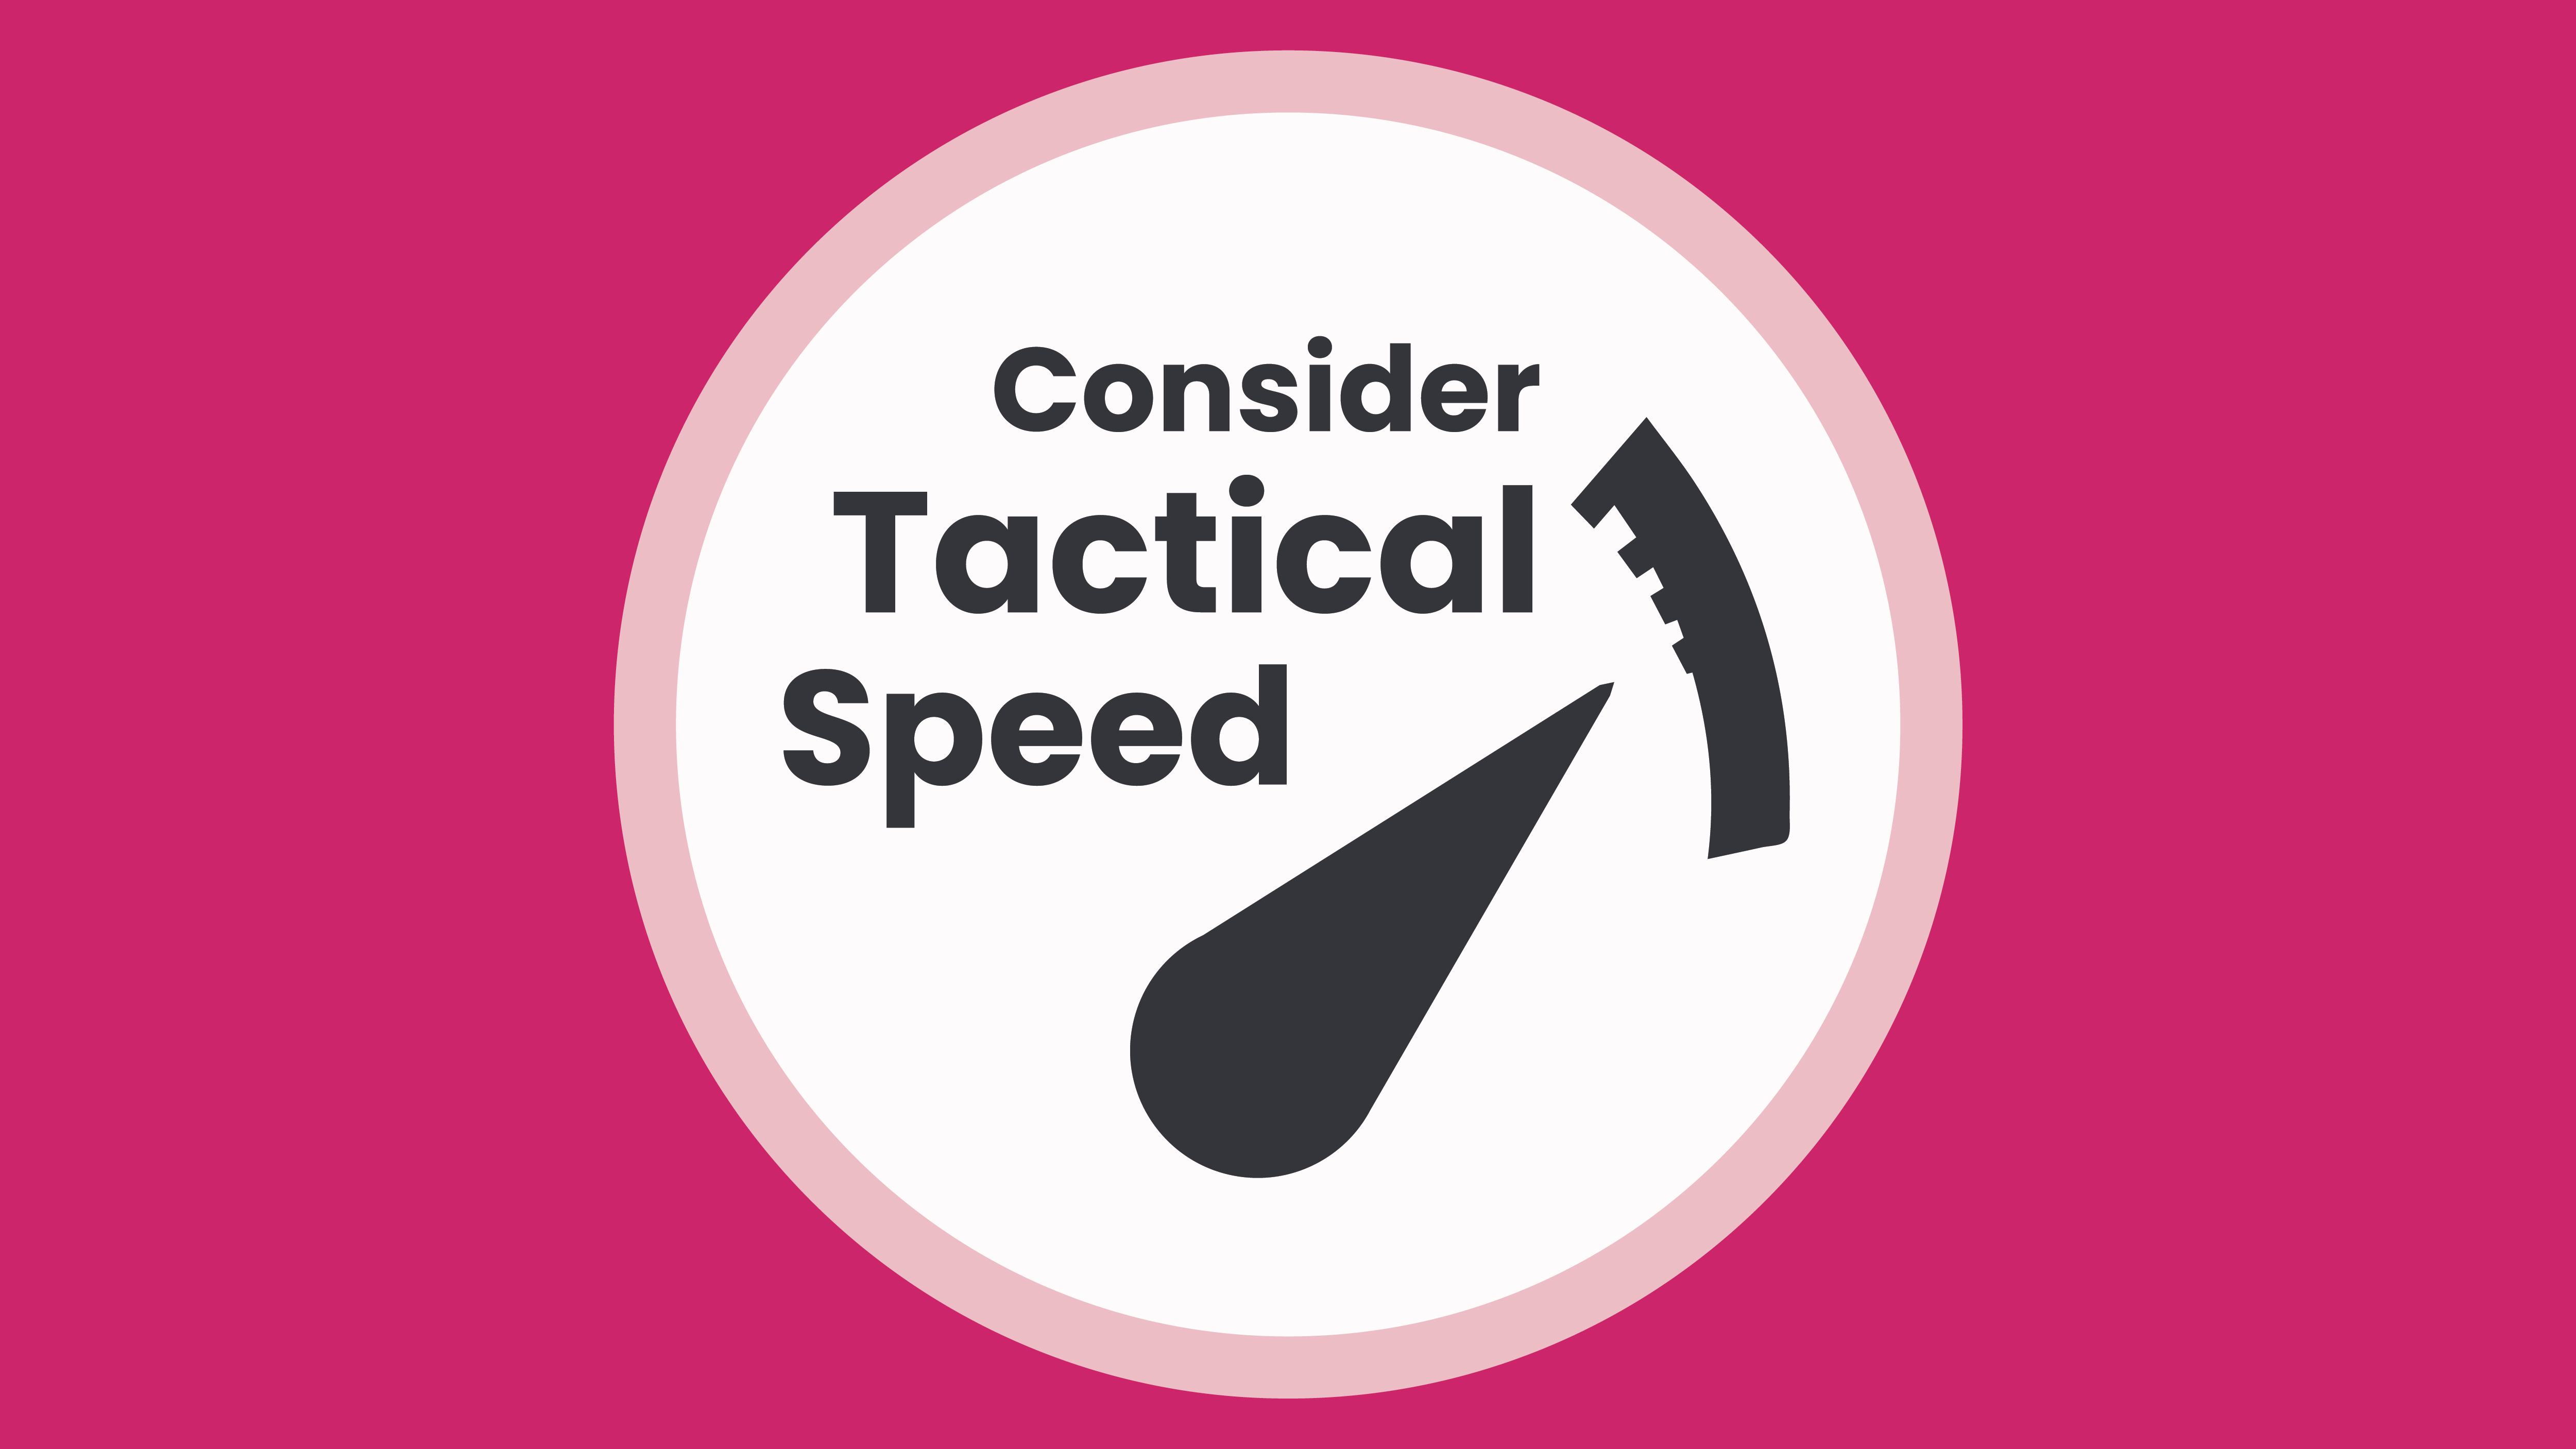 Consider Tactical Speed